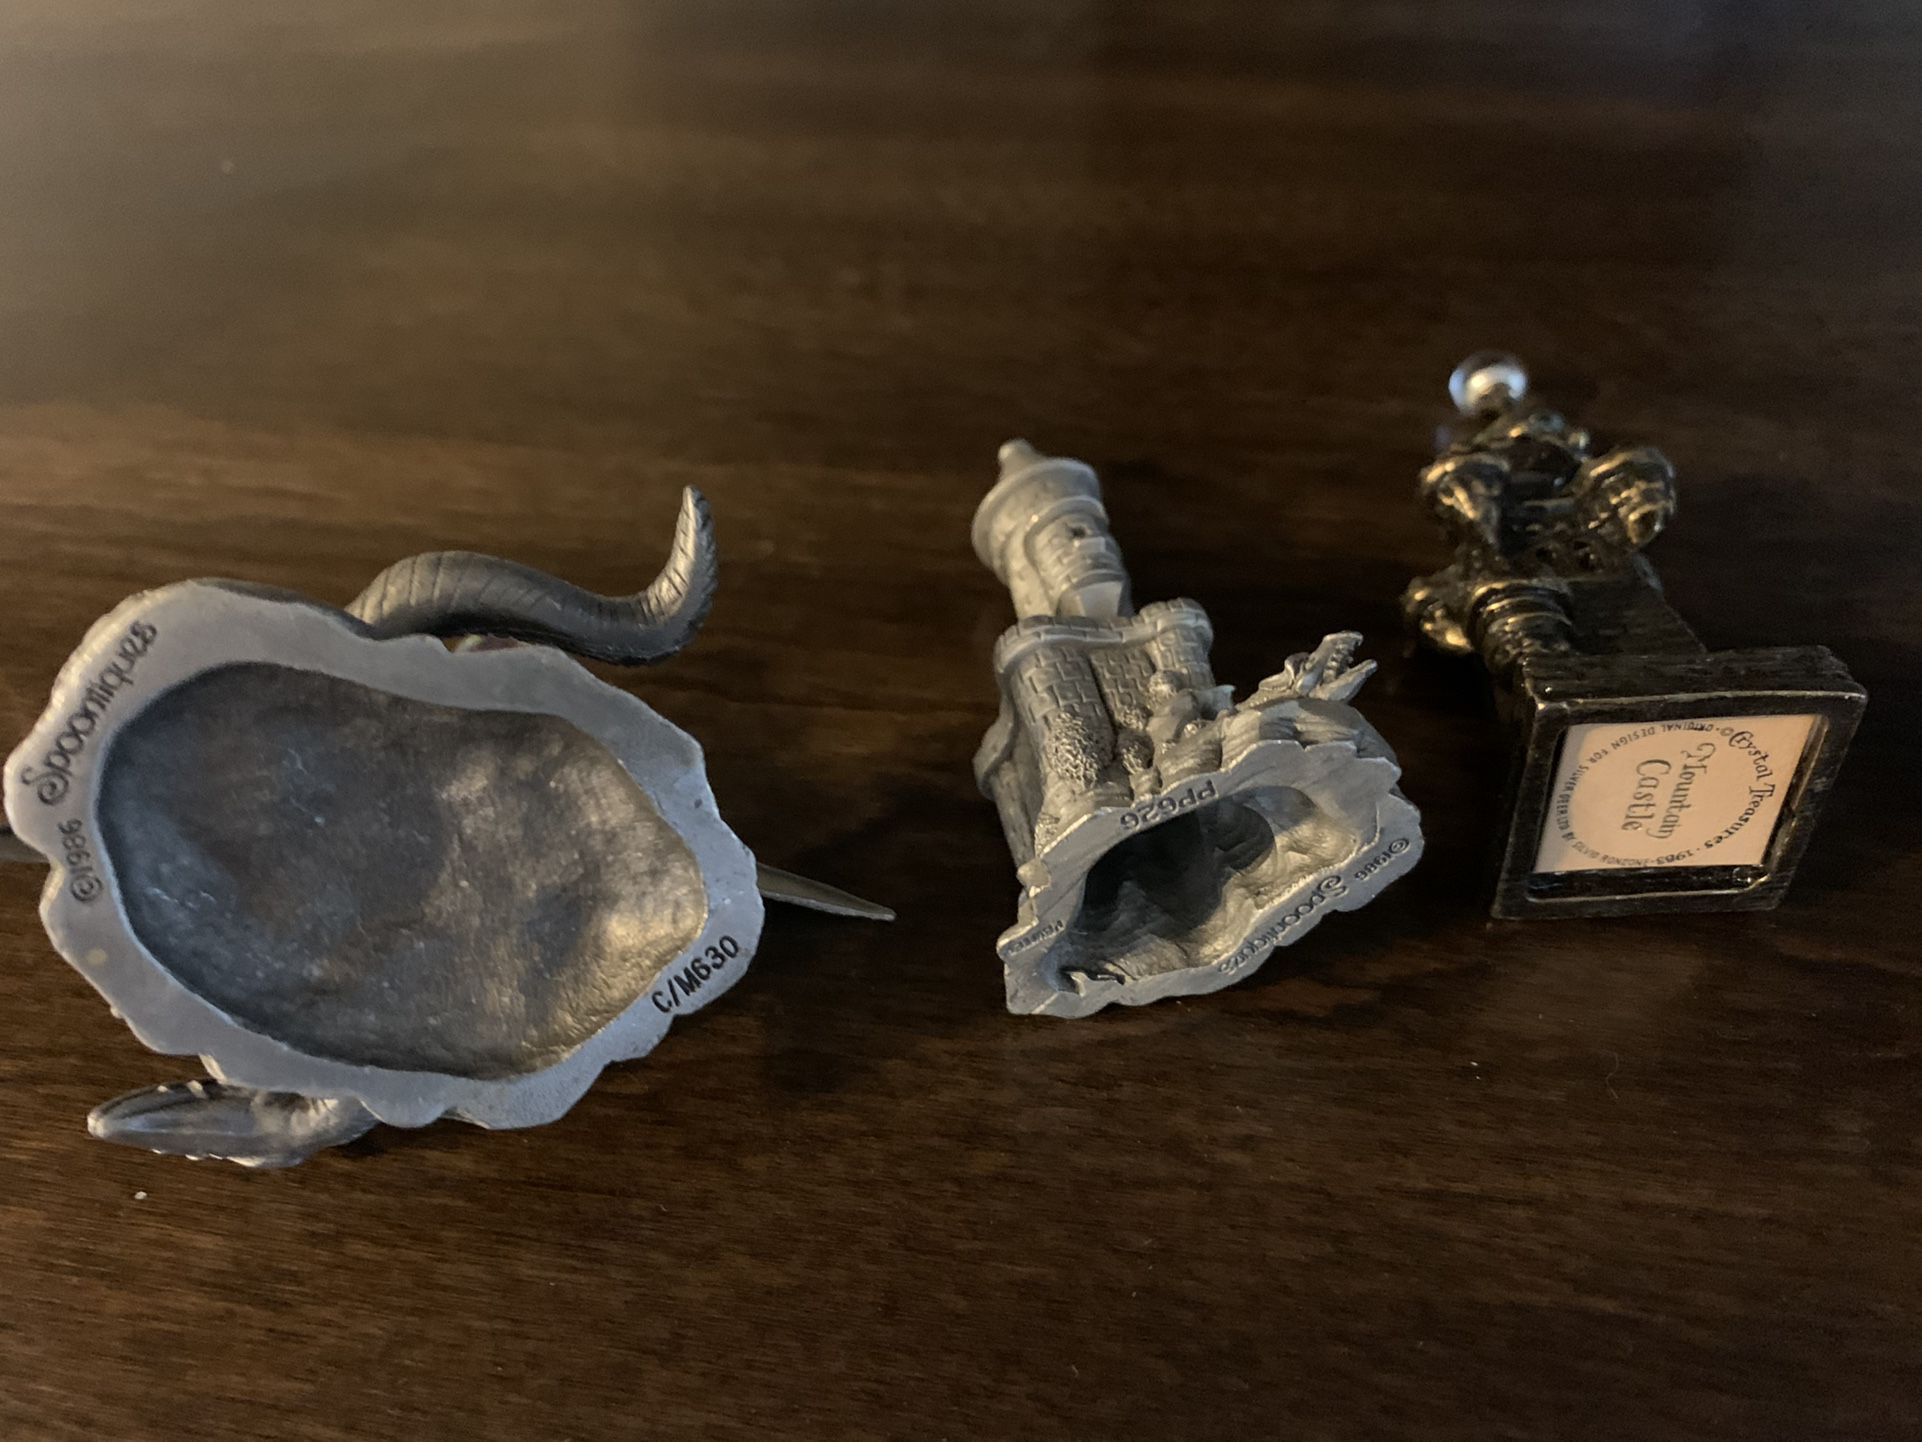 5 Pewter  Figurines castles and dragons for 10.00